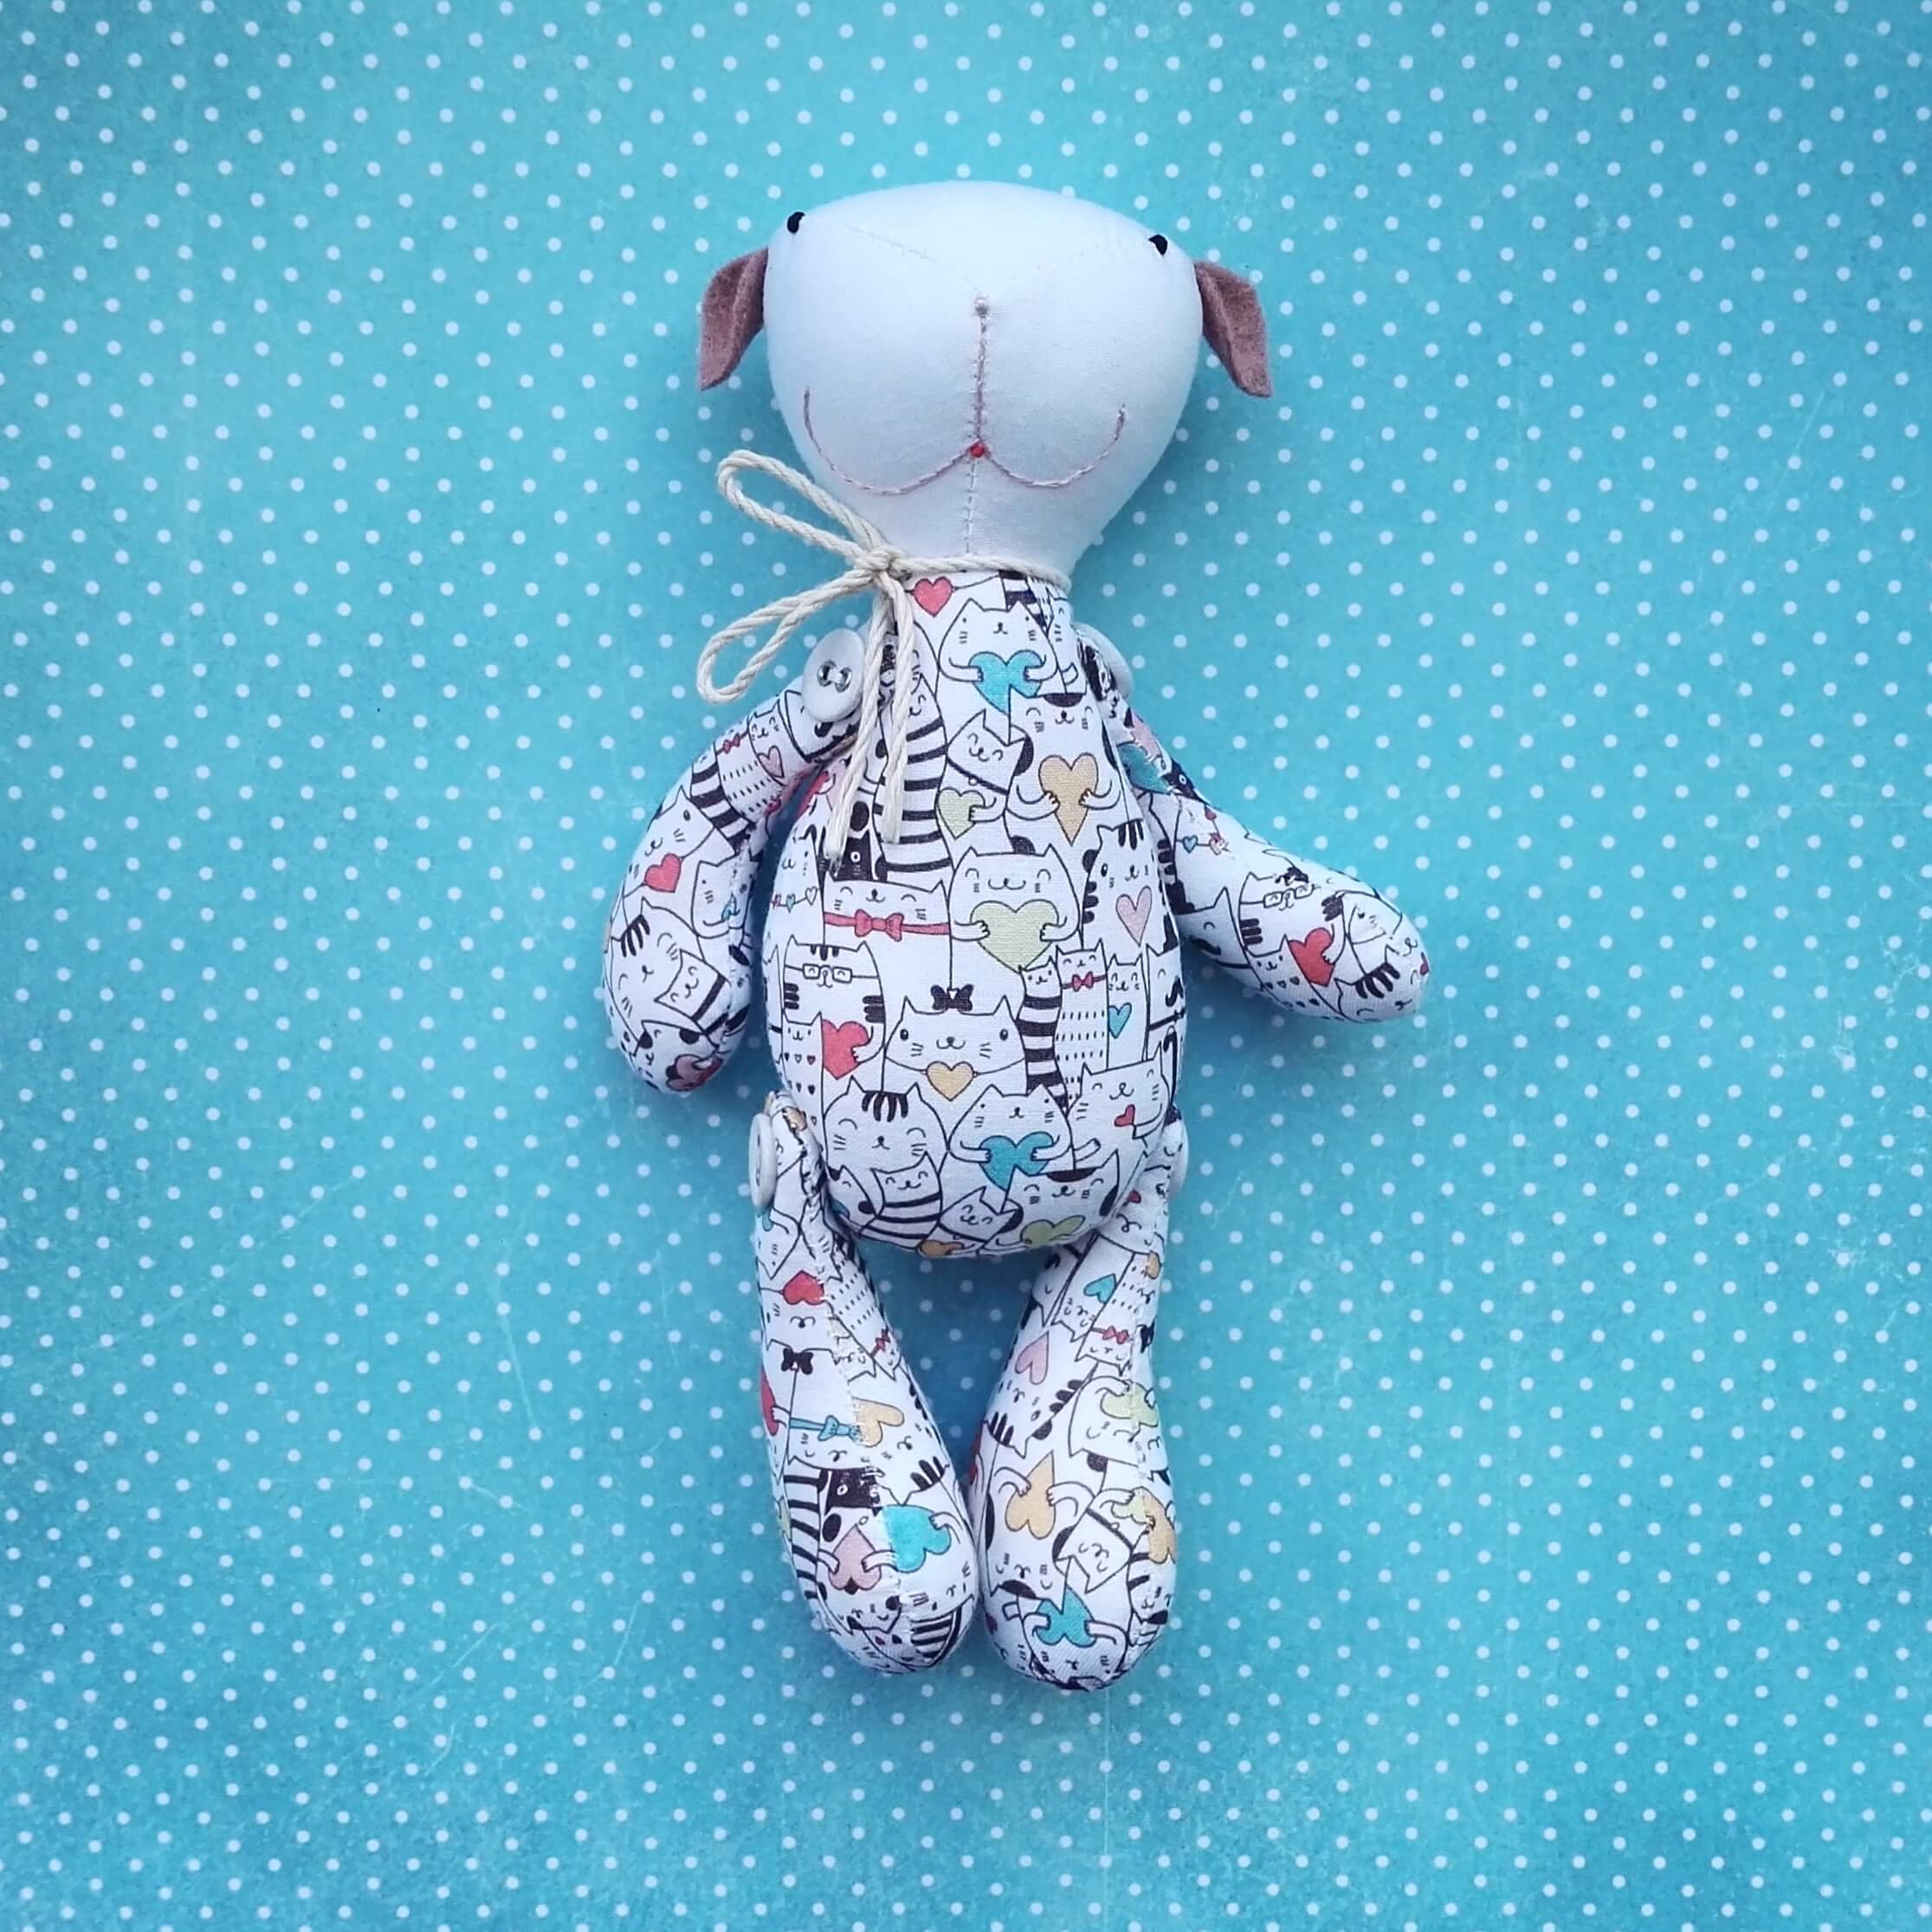 What fabrics to choose for sewing soft toys? CottonBee blog | Sewing, DIY,  crafts & more!